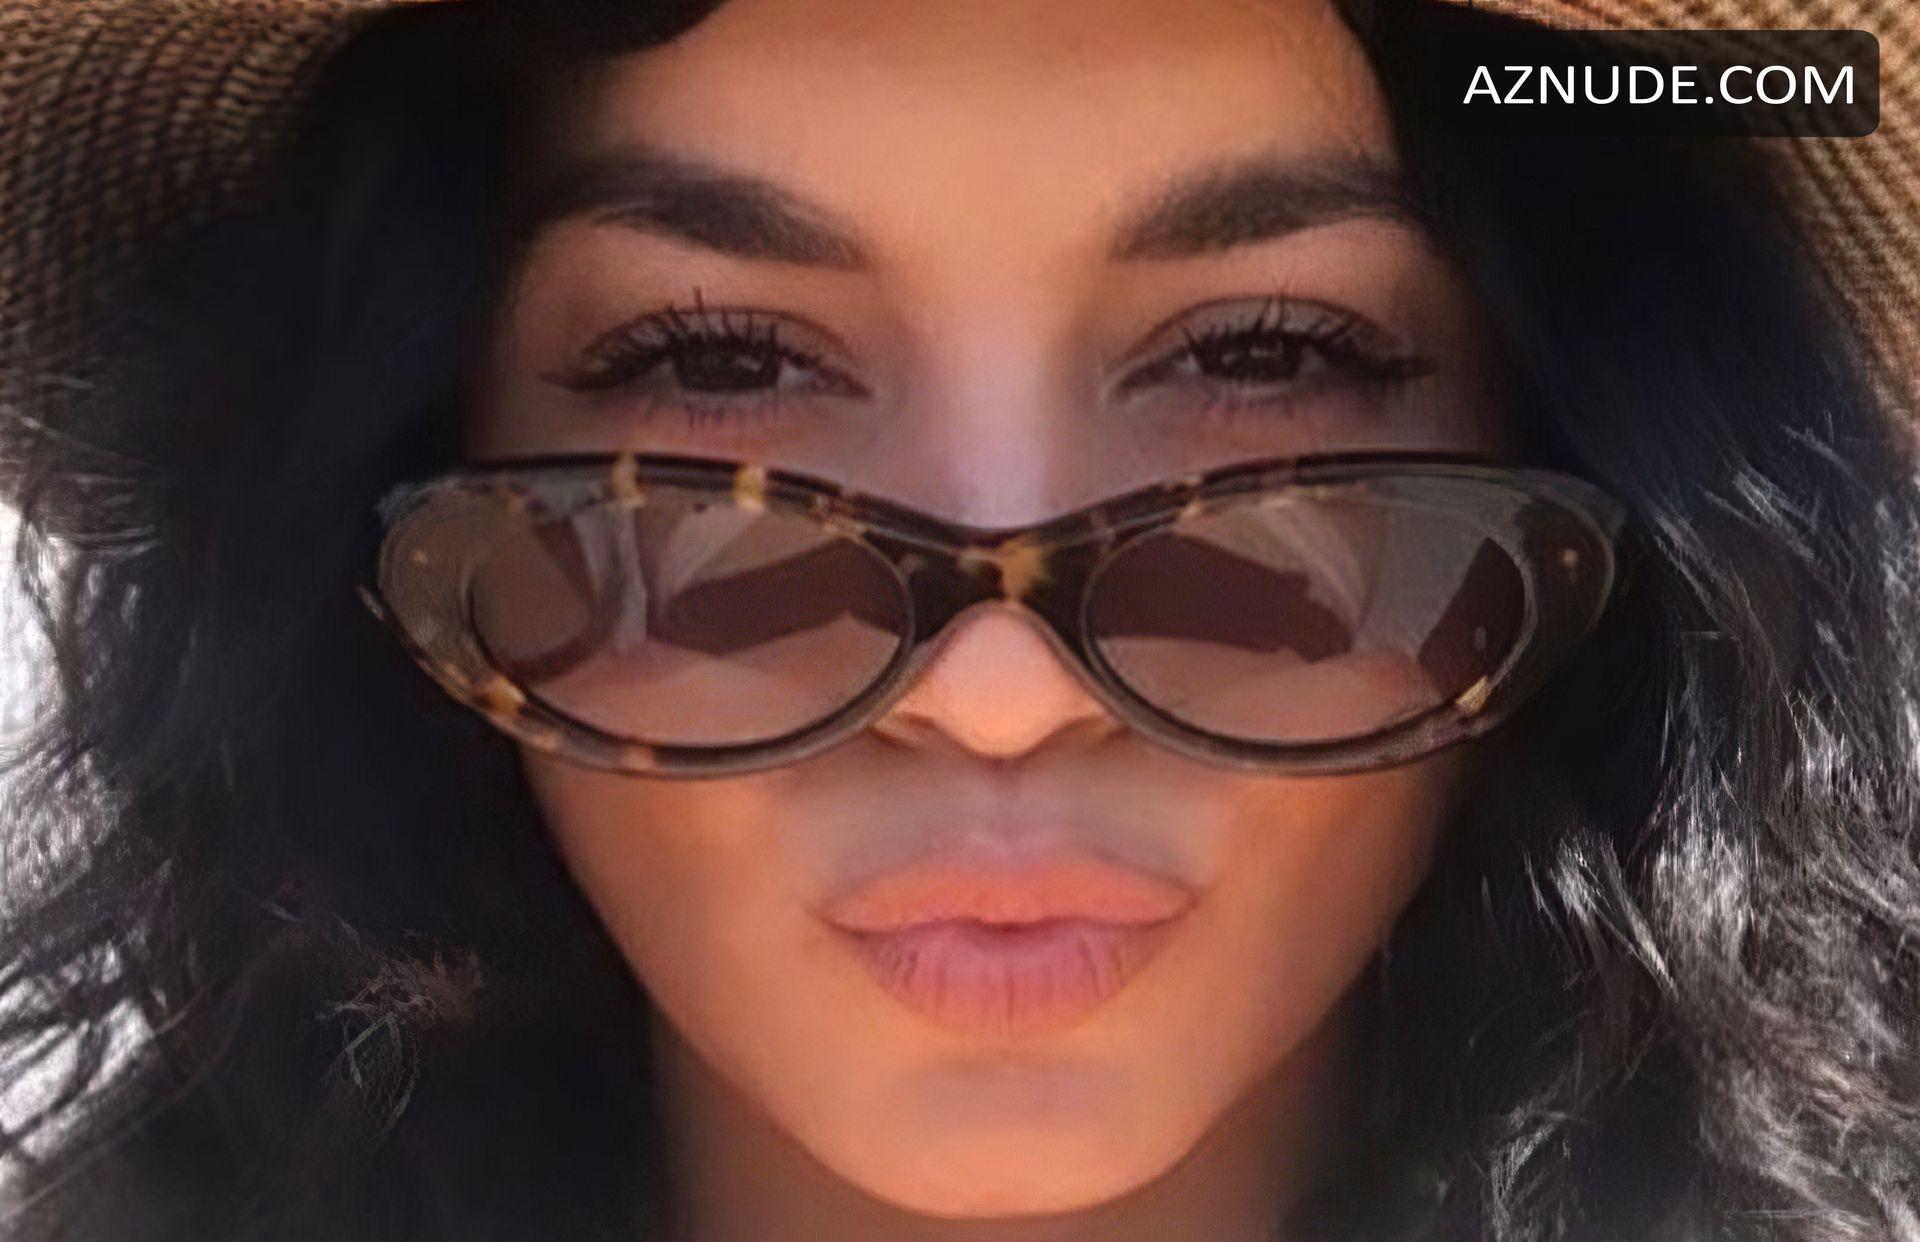 Vanessa Hudgens Showed Her Tits In The Reflection Of Her Sunglasses During Commercial Aznude